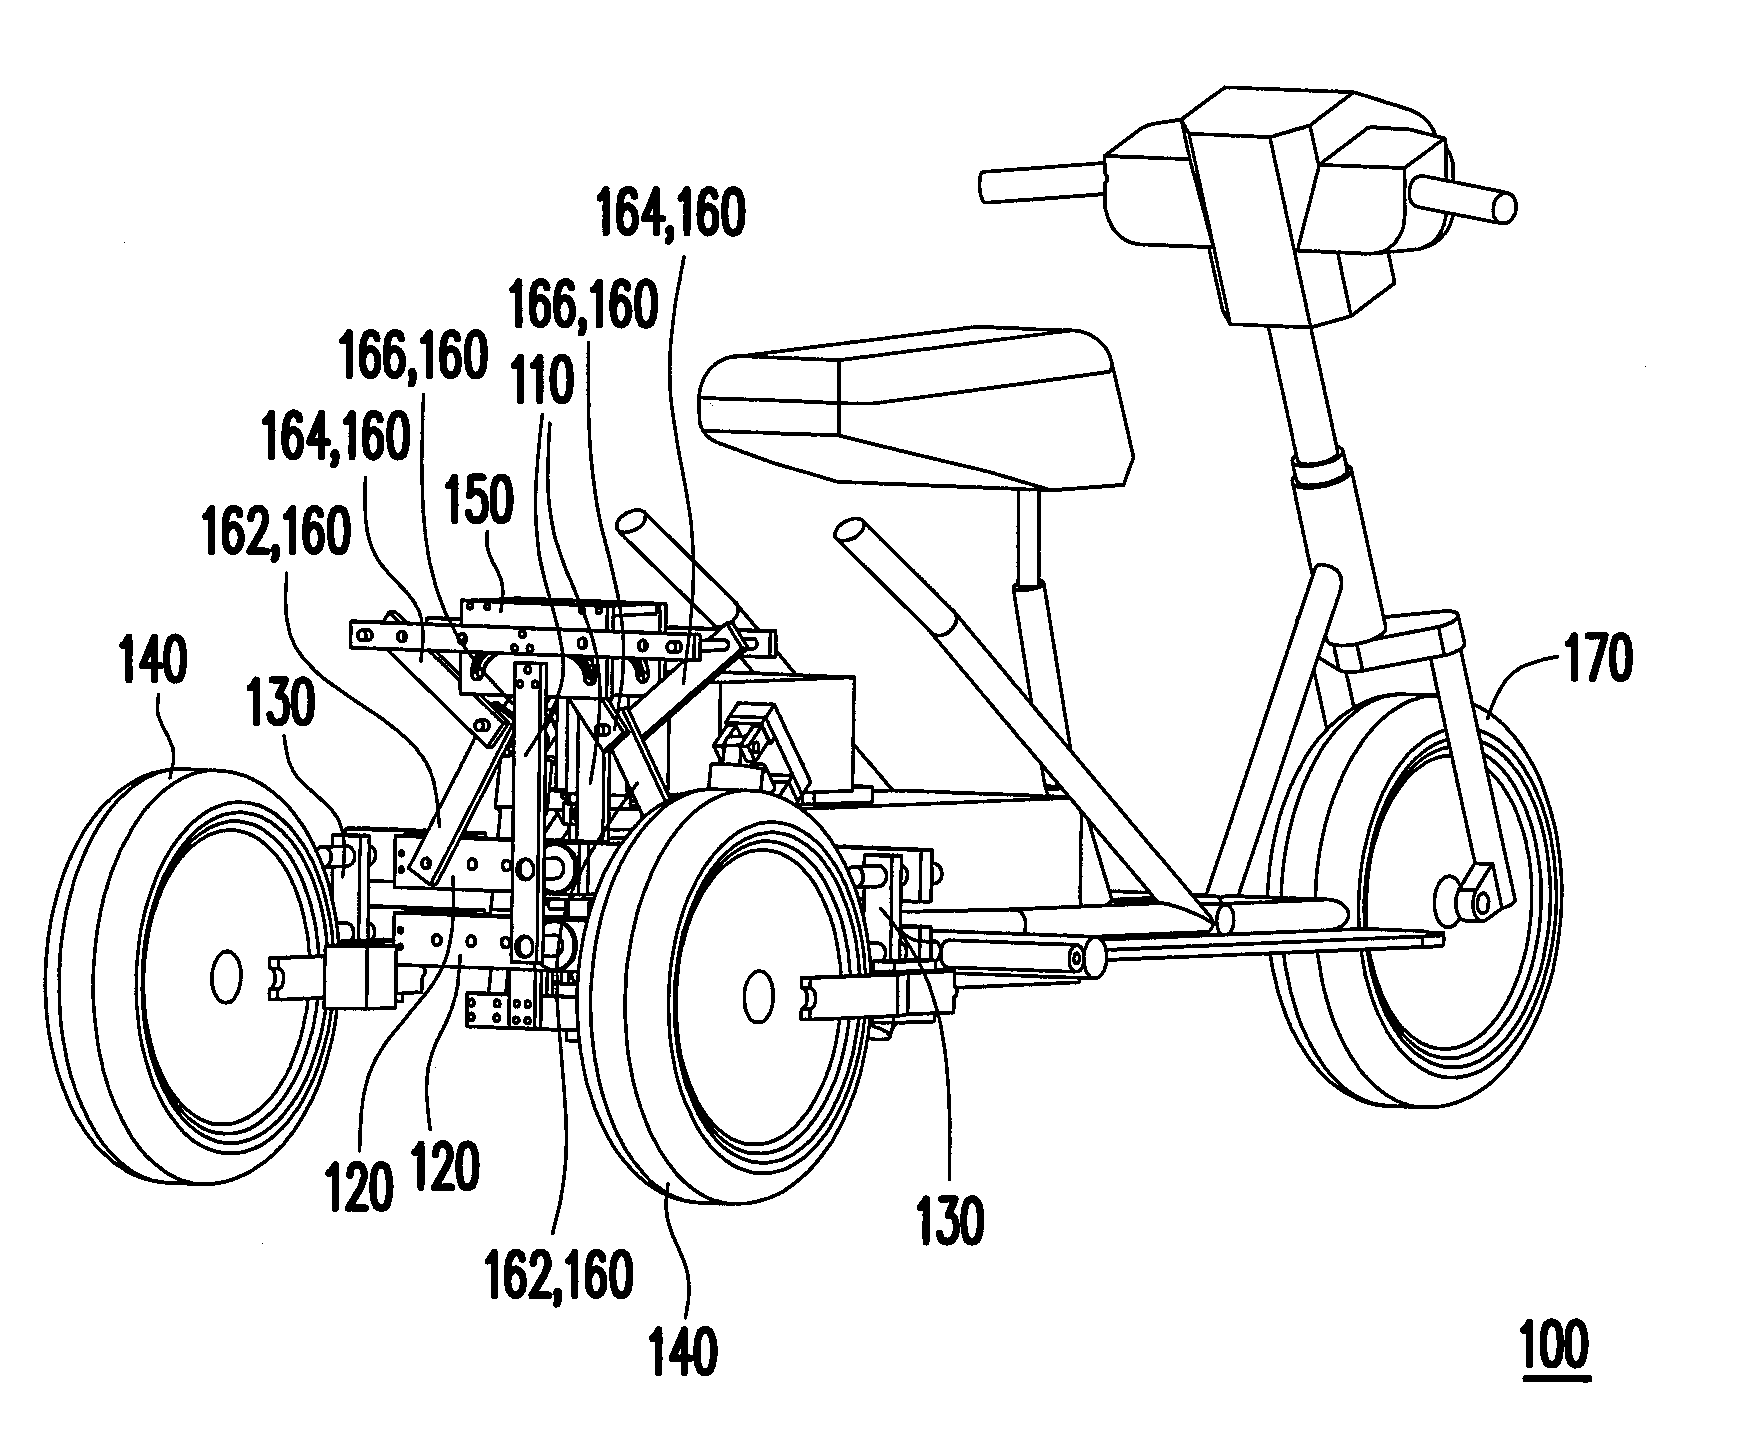 Three-wheeled motor vehicle with high safety